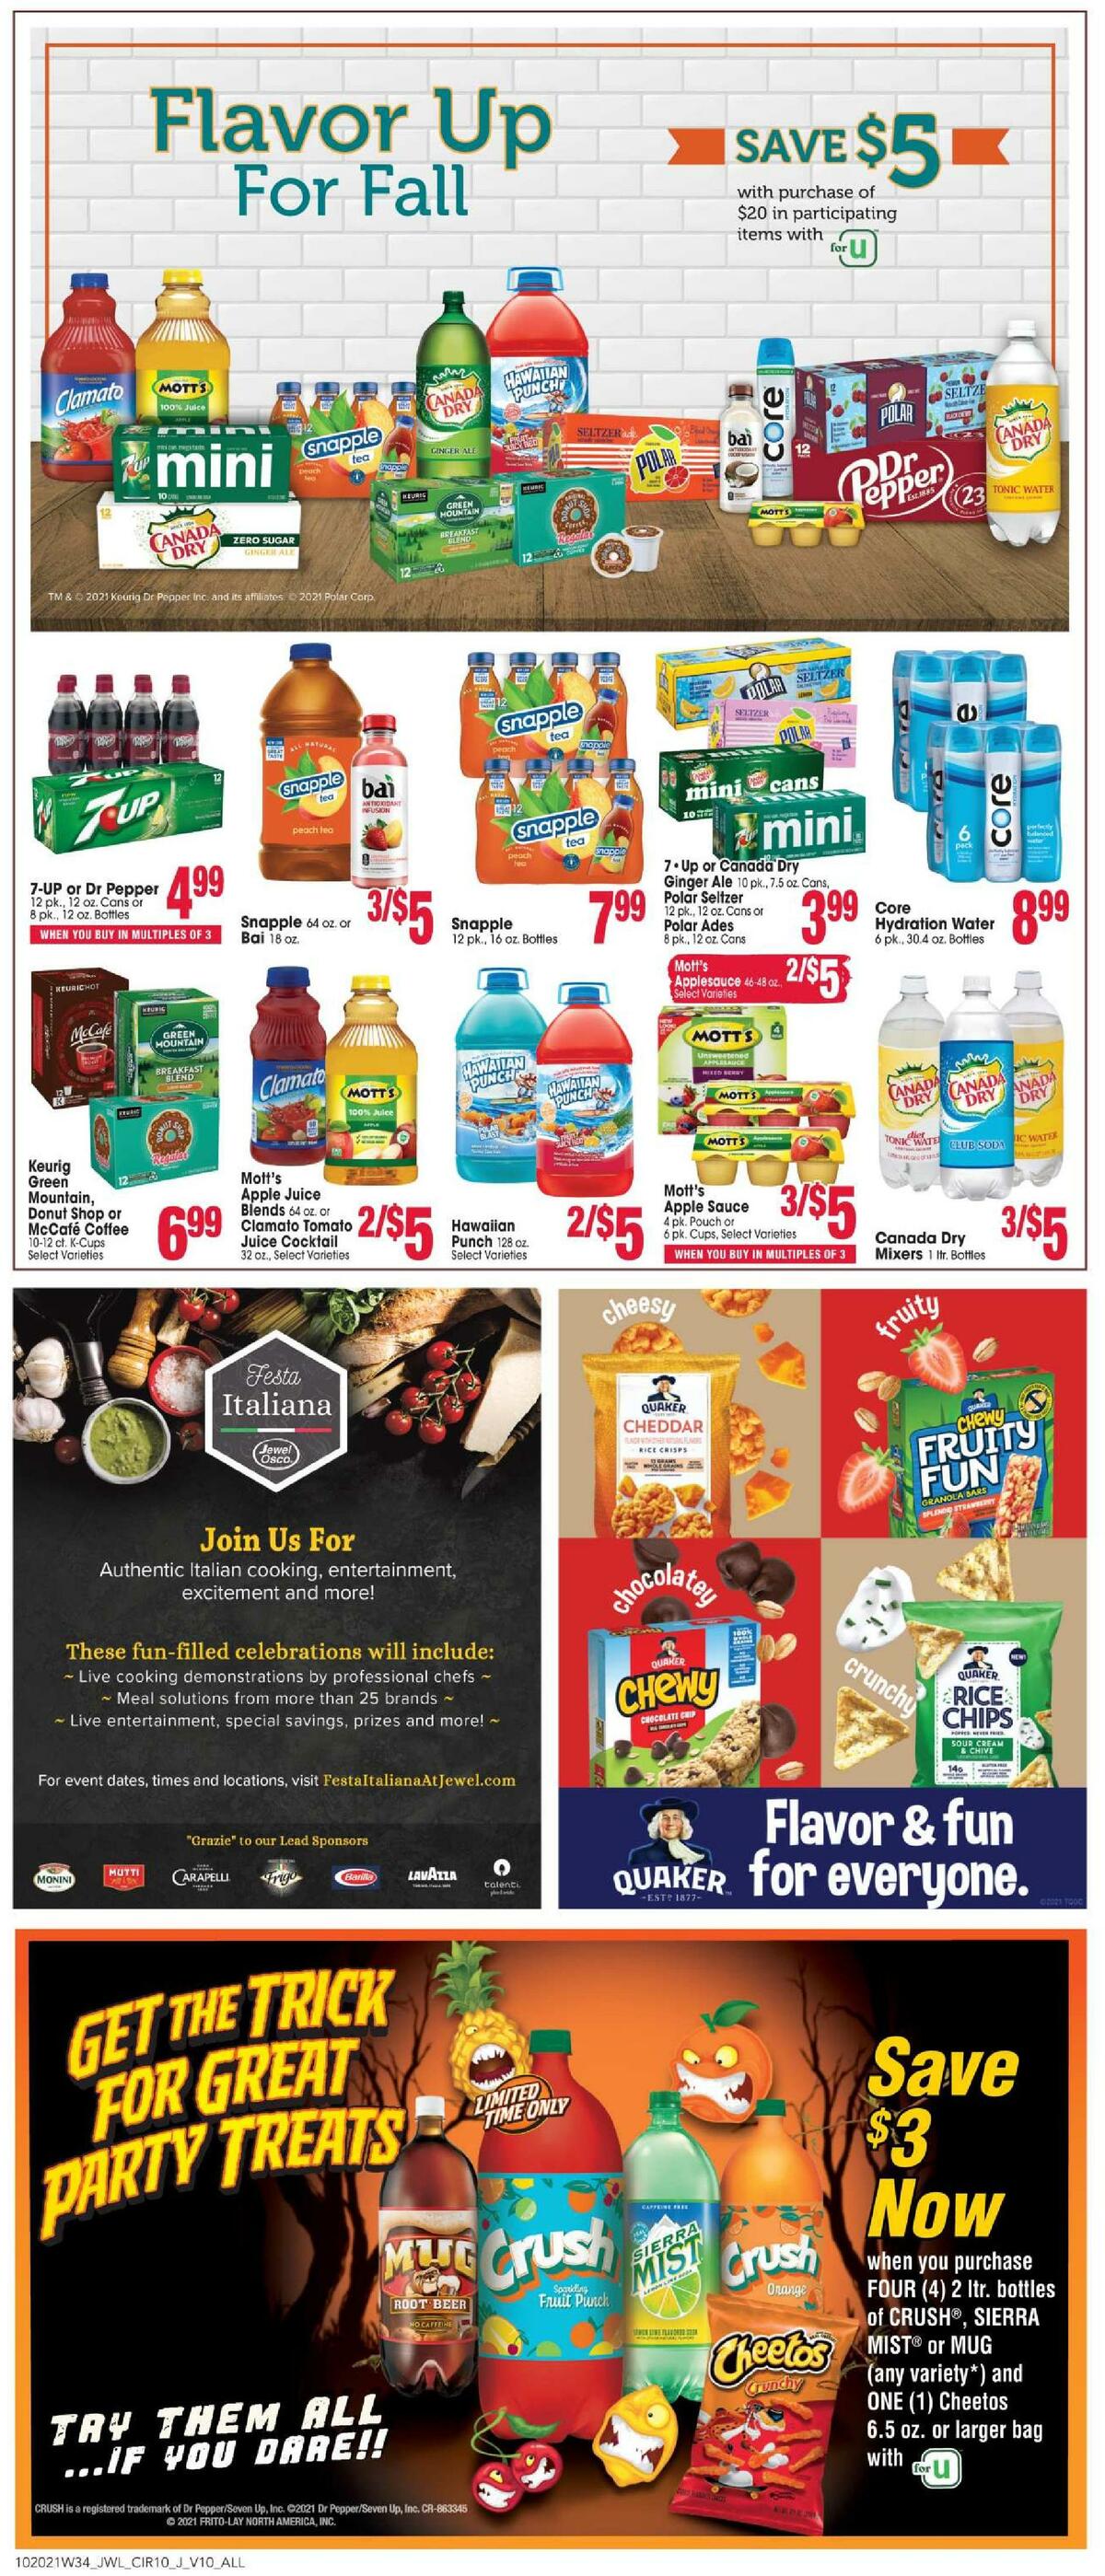 Jewel Osco Weekly Ad from October 20